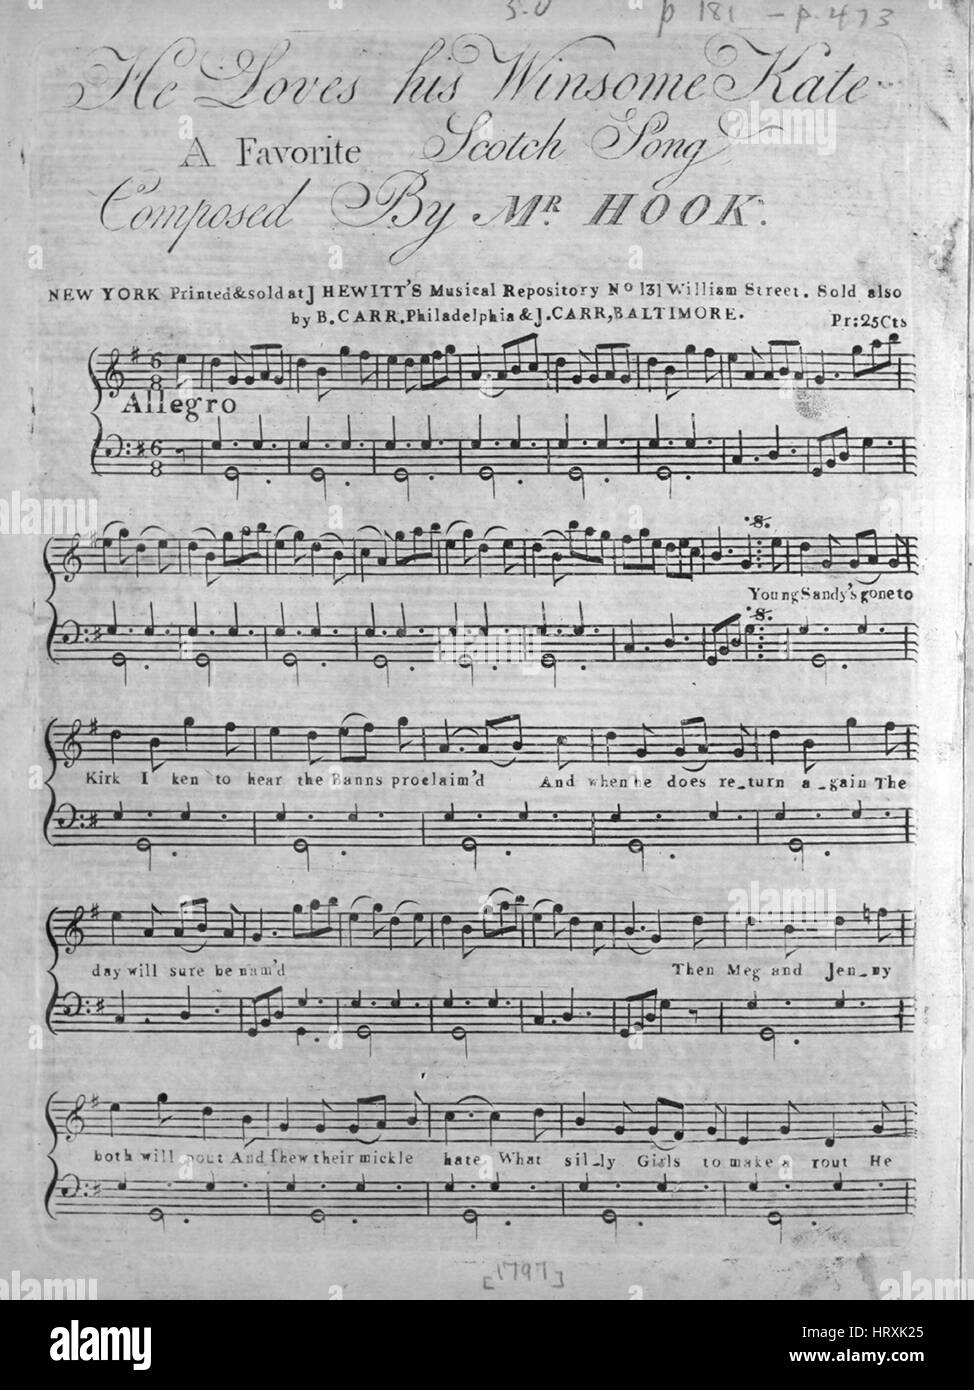 Sheet music cover image of the song 'He Loves his Winsome Kate A Favorite Scotch Song', with original authorship notes reading 'Composed by Mr Hook', United States, 1797. The publisher is listed as 'J. Hewitt's Musical Repository, No.131 William Street', the form of composition is 'strophic with chorus', the instrumentation is 'piano and voice', the first line reads 'Young Sandy's gone to Kirk I ken to hear the Banns proclaim'd', and the illustration artist is listed as 'None'. Stock Photo